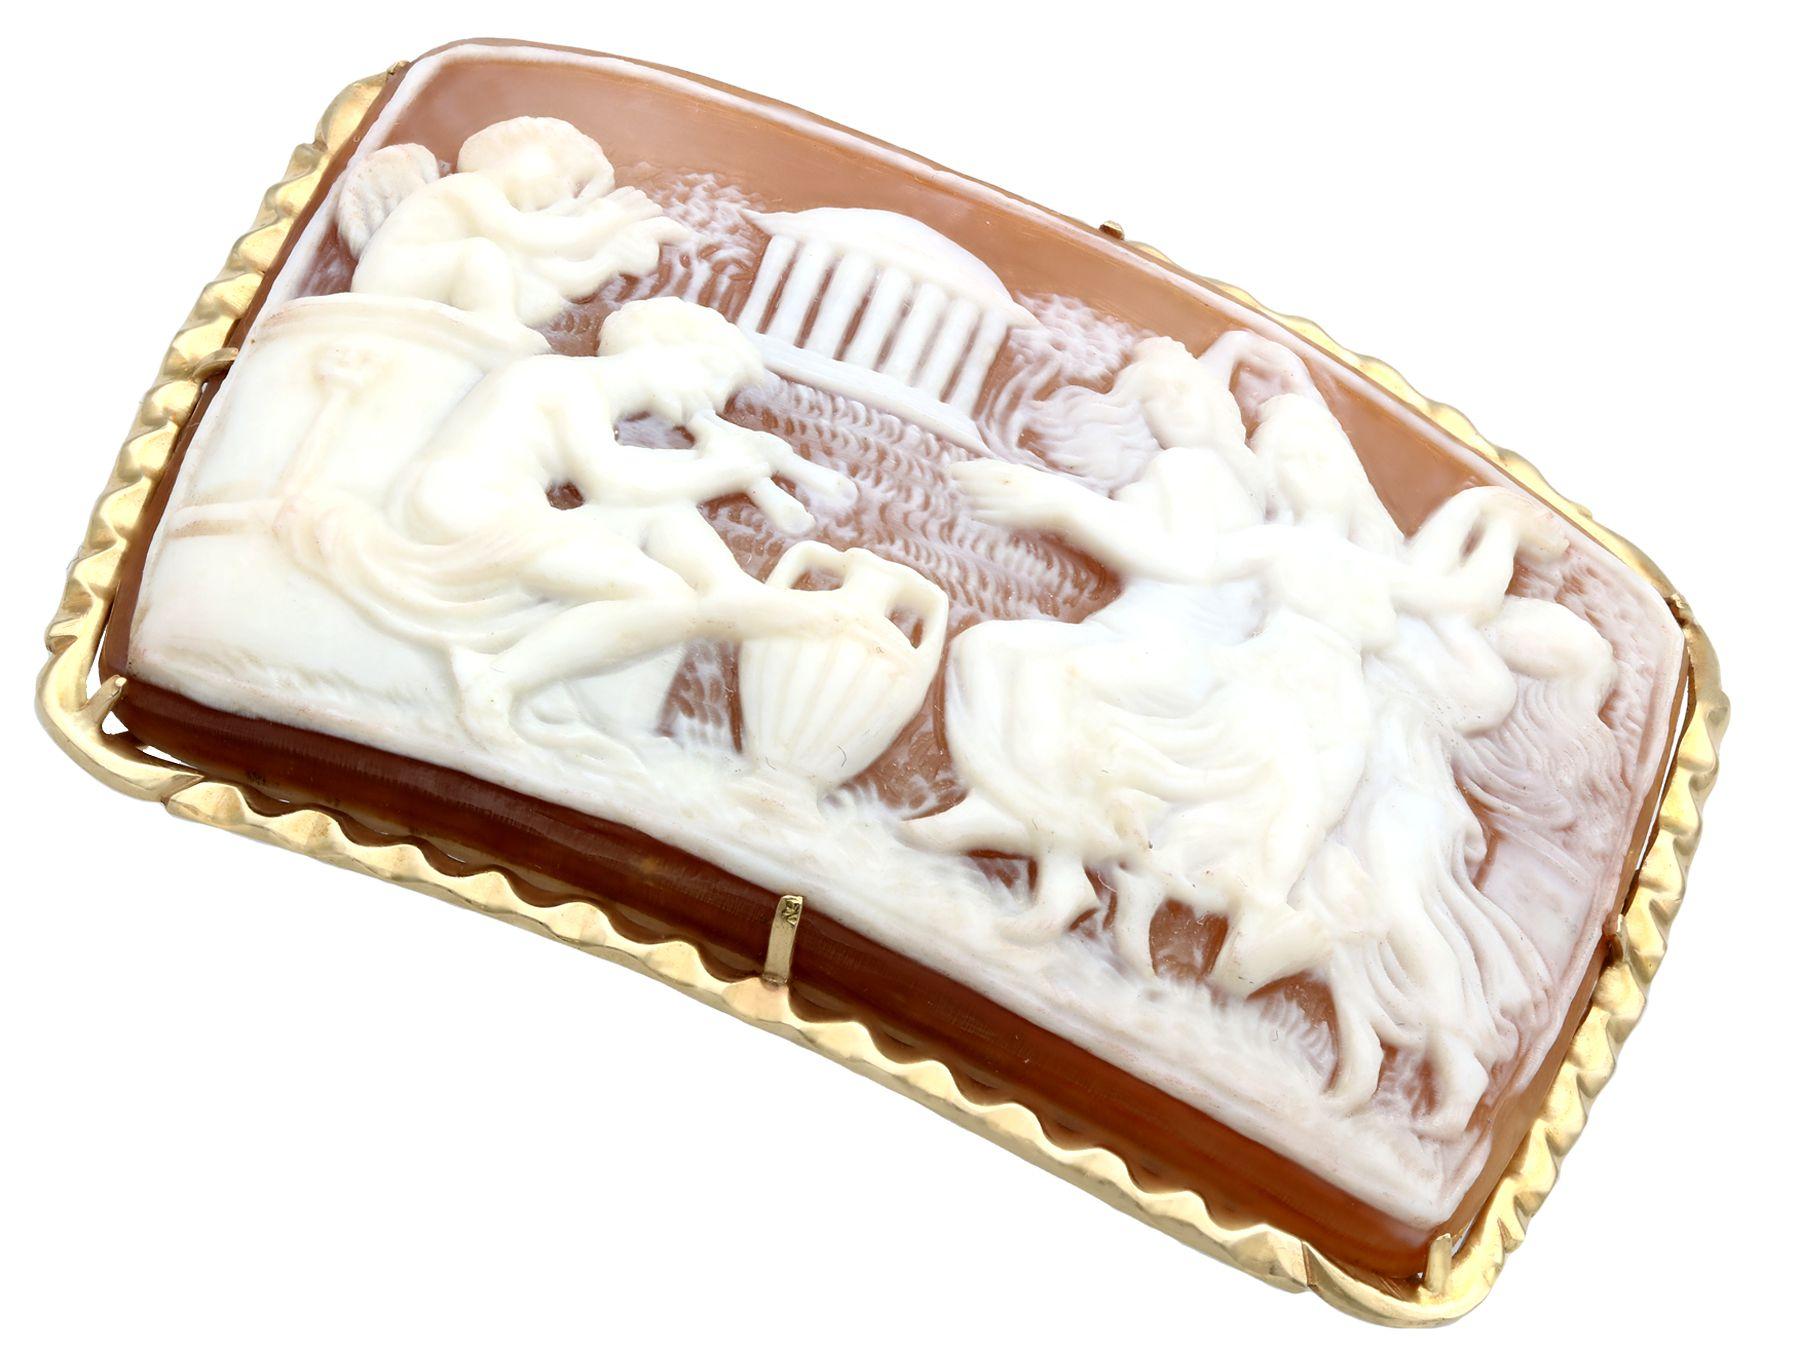 A fine and impressive Victorian 14 karat yellow gold, carved shell cameo brooch; part of our diverse antique jewellery and estate jewelry collections.

This impressive carved shell antique brooch has been crafted in 14k yellow gold.

The finely